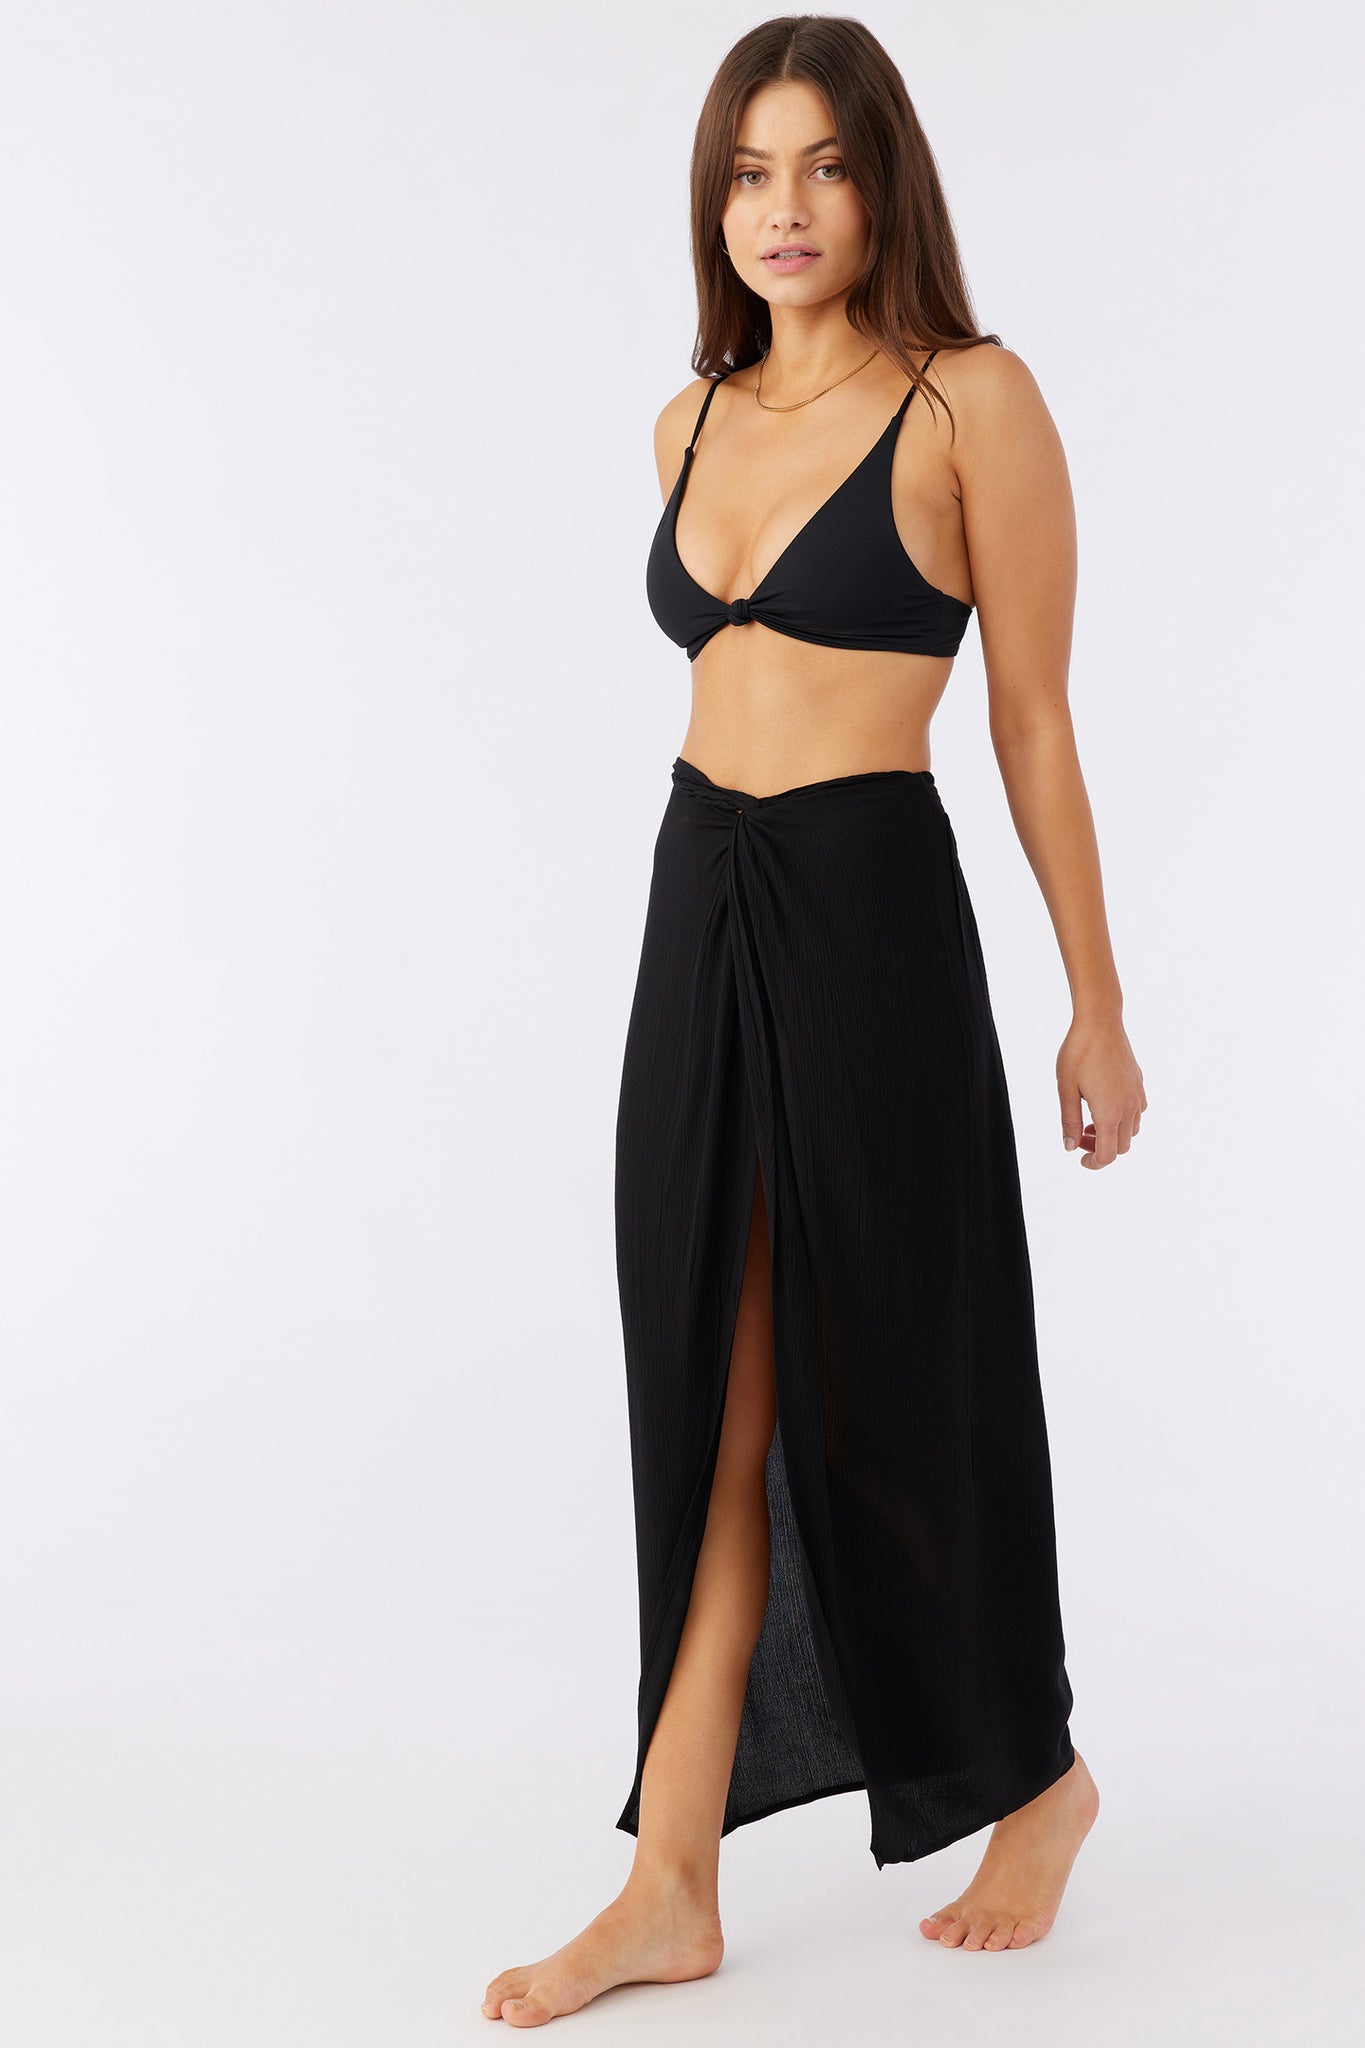 SALTWATER SOLIDS HANALEI MAXI SKIRT COVER-UP